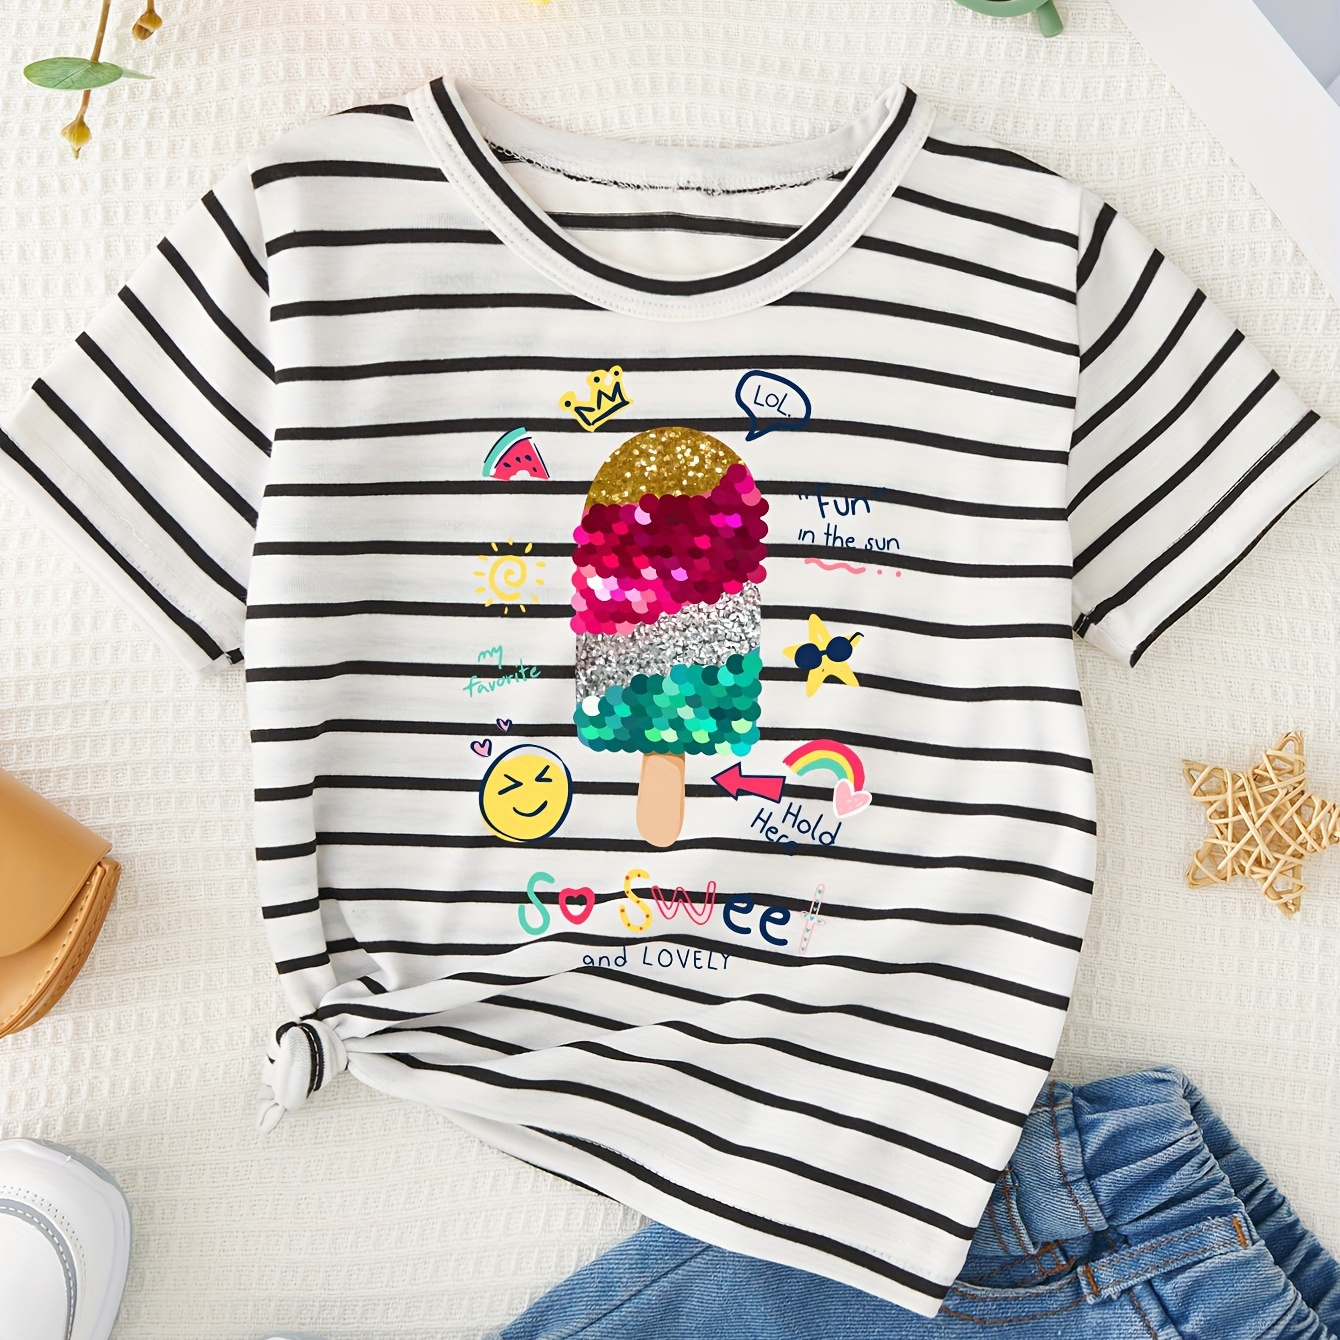 

Cartoon Childhood Elements Graphic Print, Girls' Casual & Comfy Crew Neck Short Sleeve Striped T-shirt For Spring & Summer, Girls' Tee & Clothes For Outdoor Activities